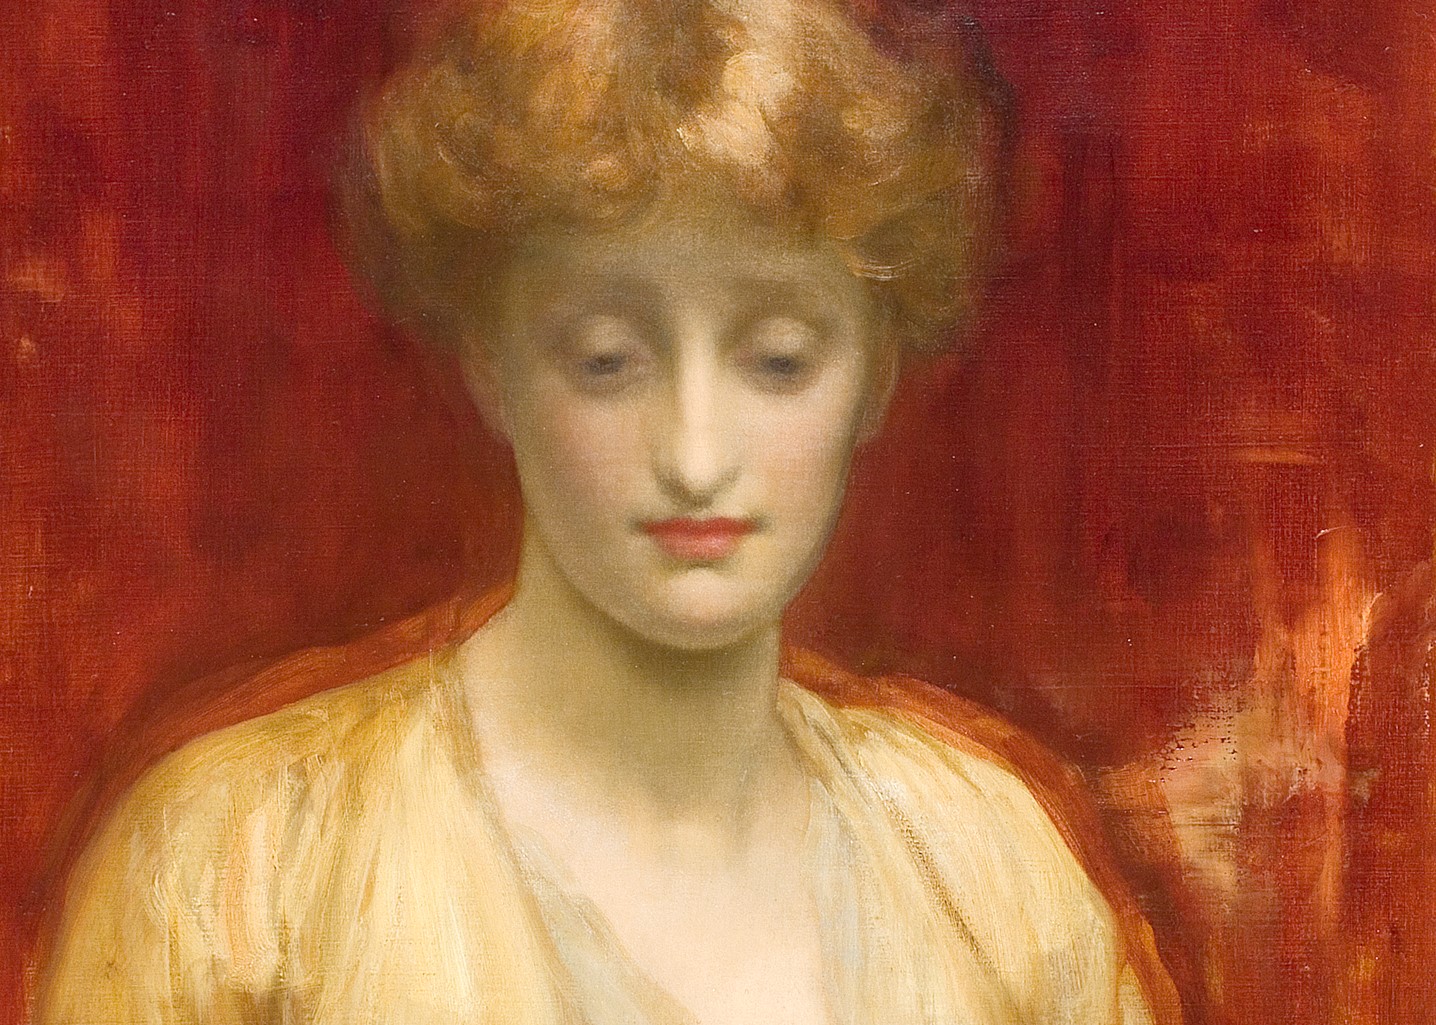 Frederic Leighton, Study for a Portrait of Miss Dene, late 19th century.